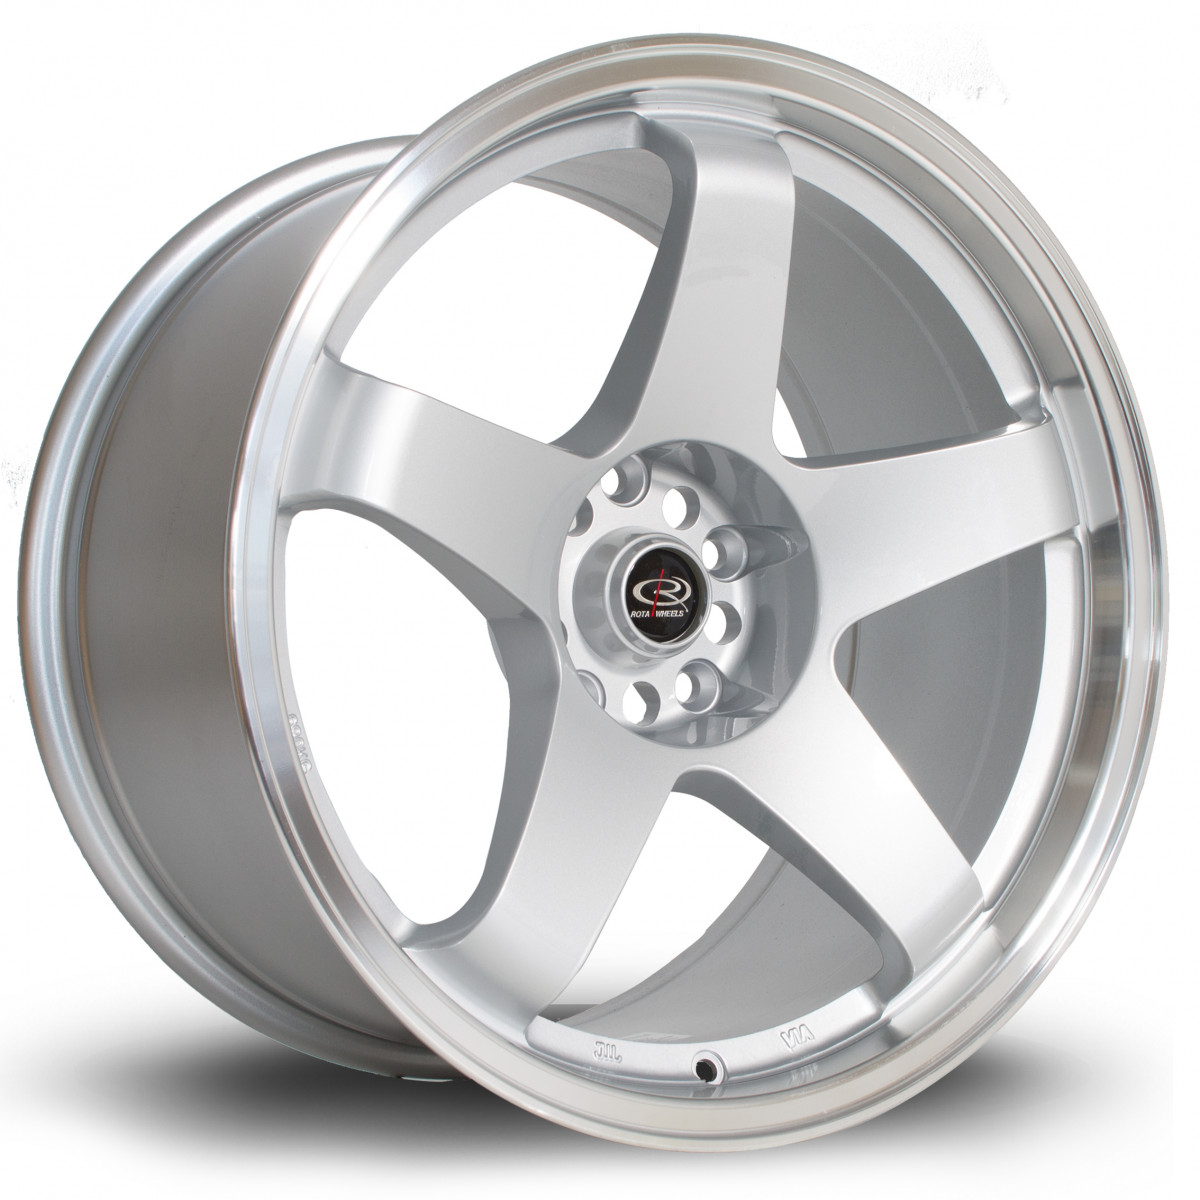 GTR 18x9.5 5x114 ET12 Silver with Polished Lip